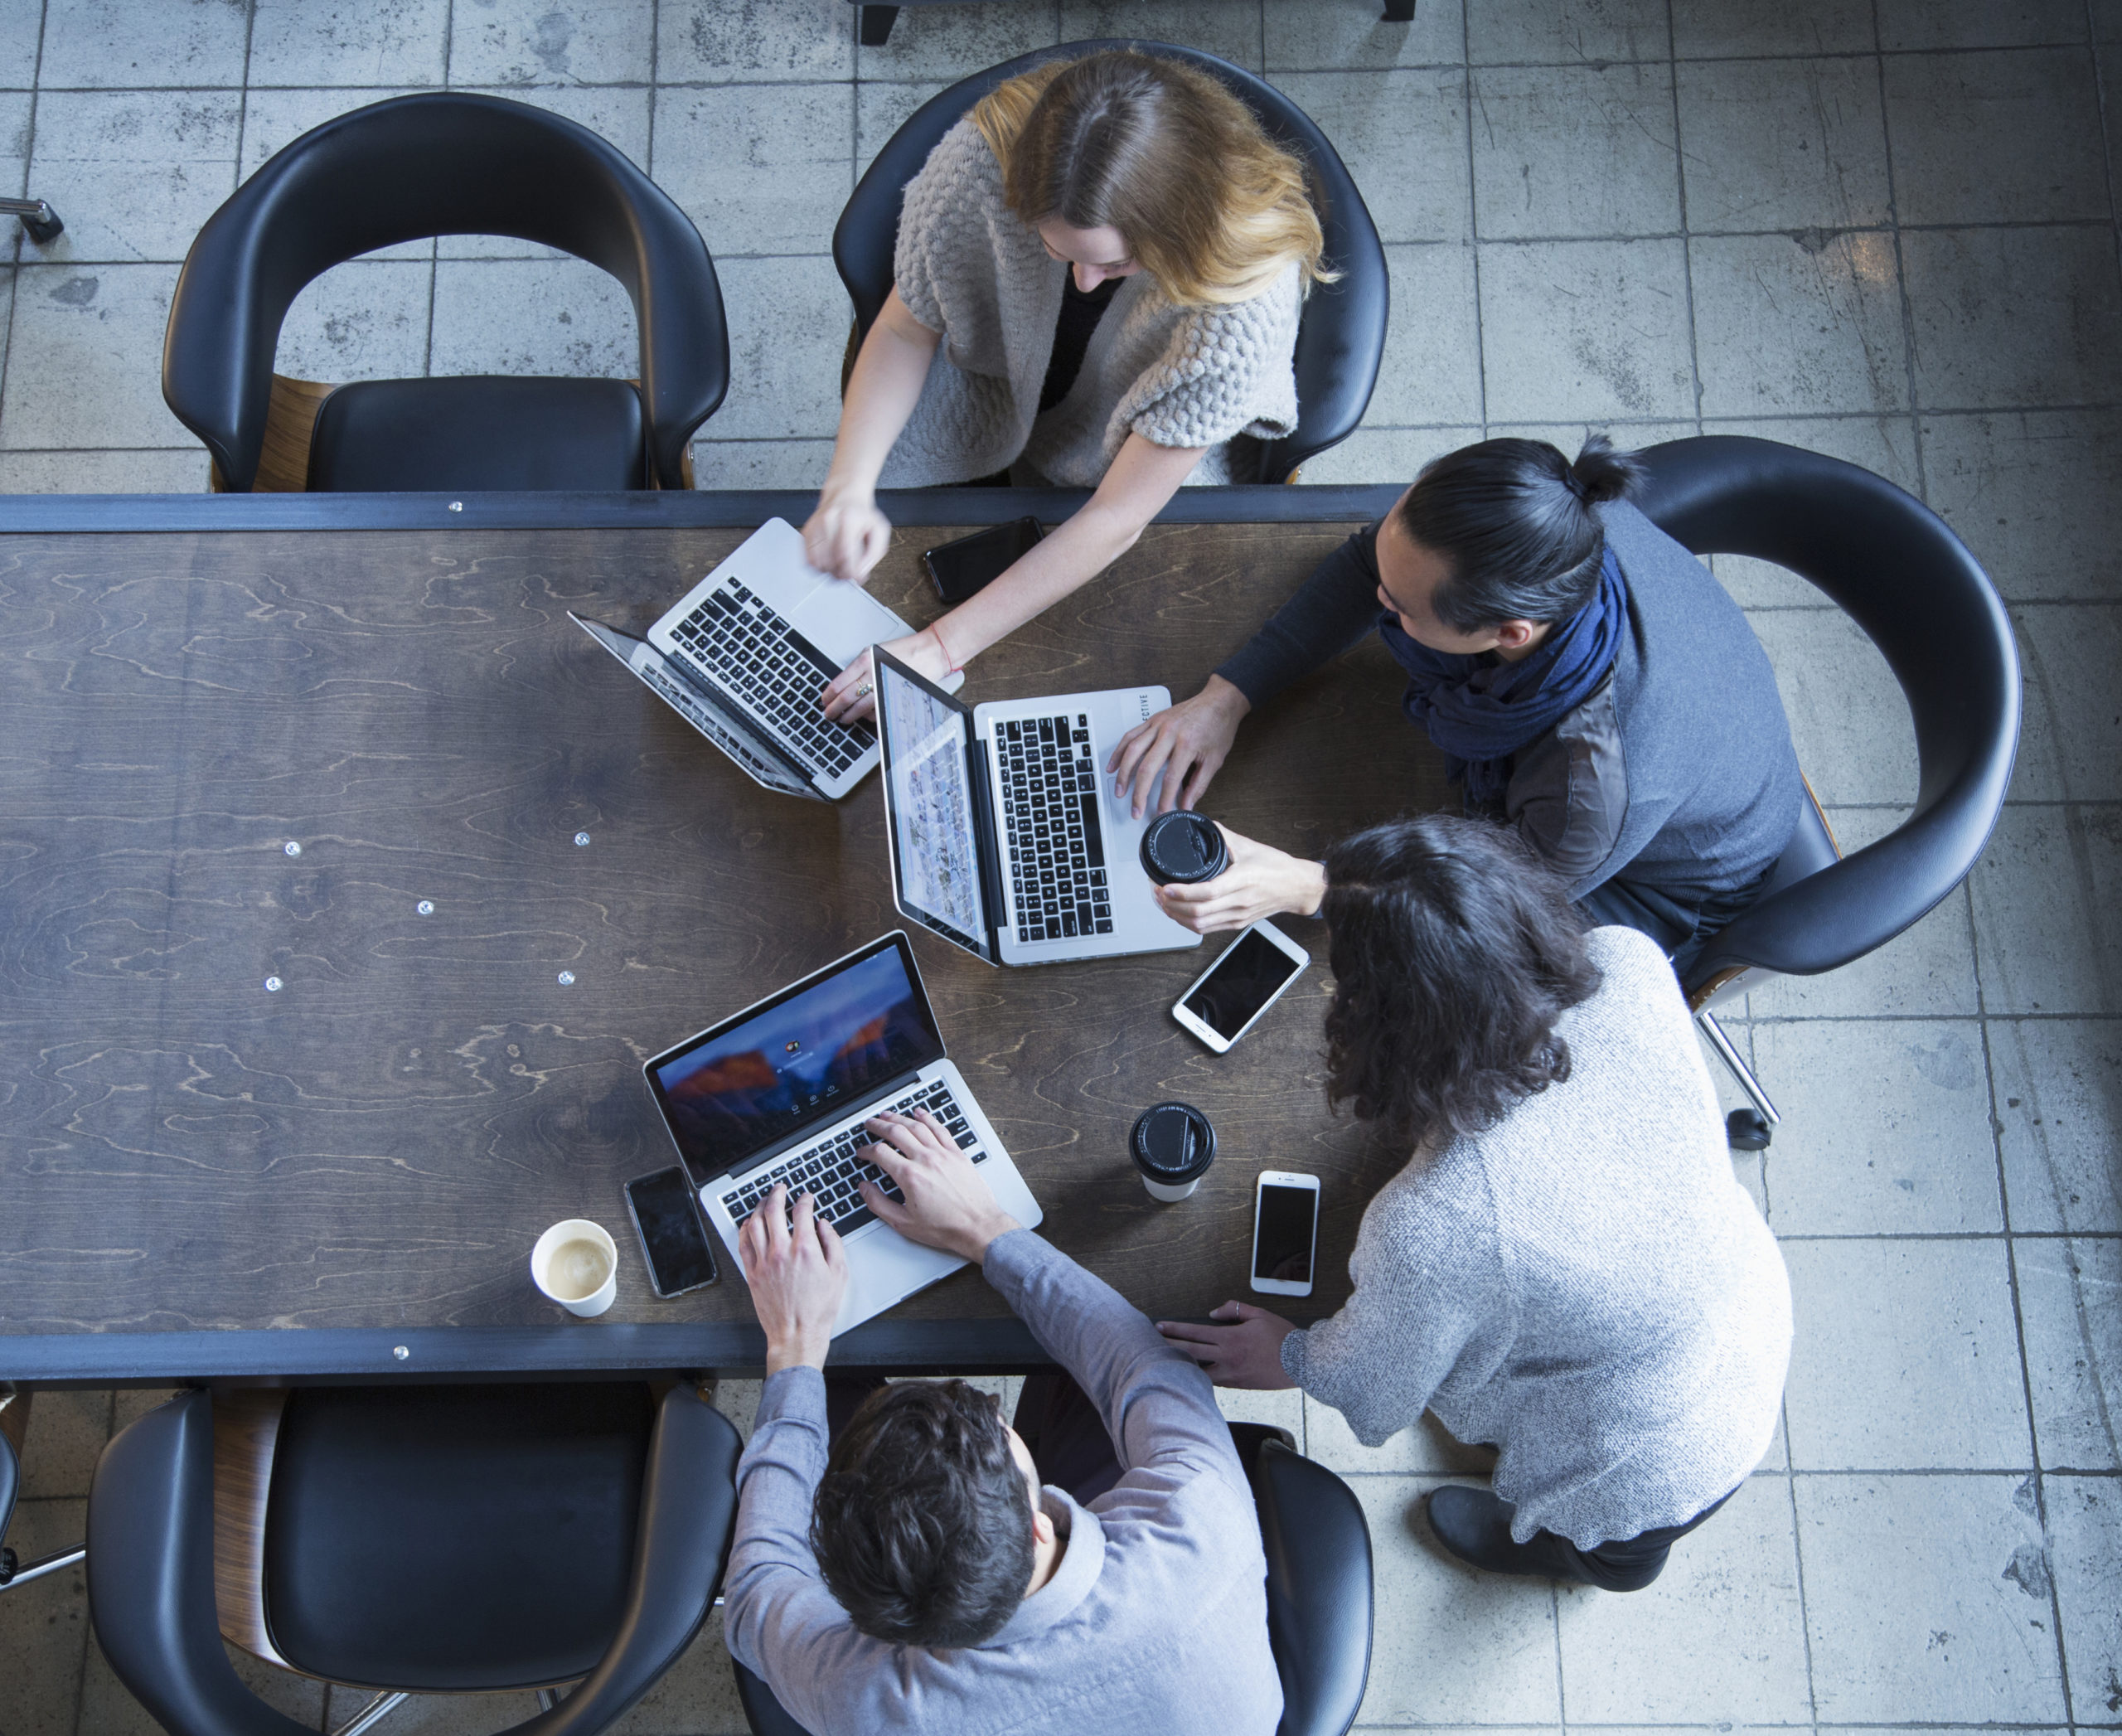 Aerial view of a team of four people huddled around three laptops at the end of a table.